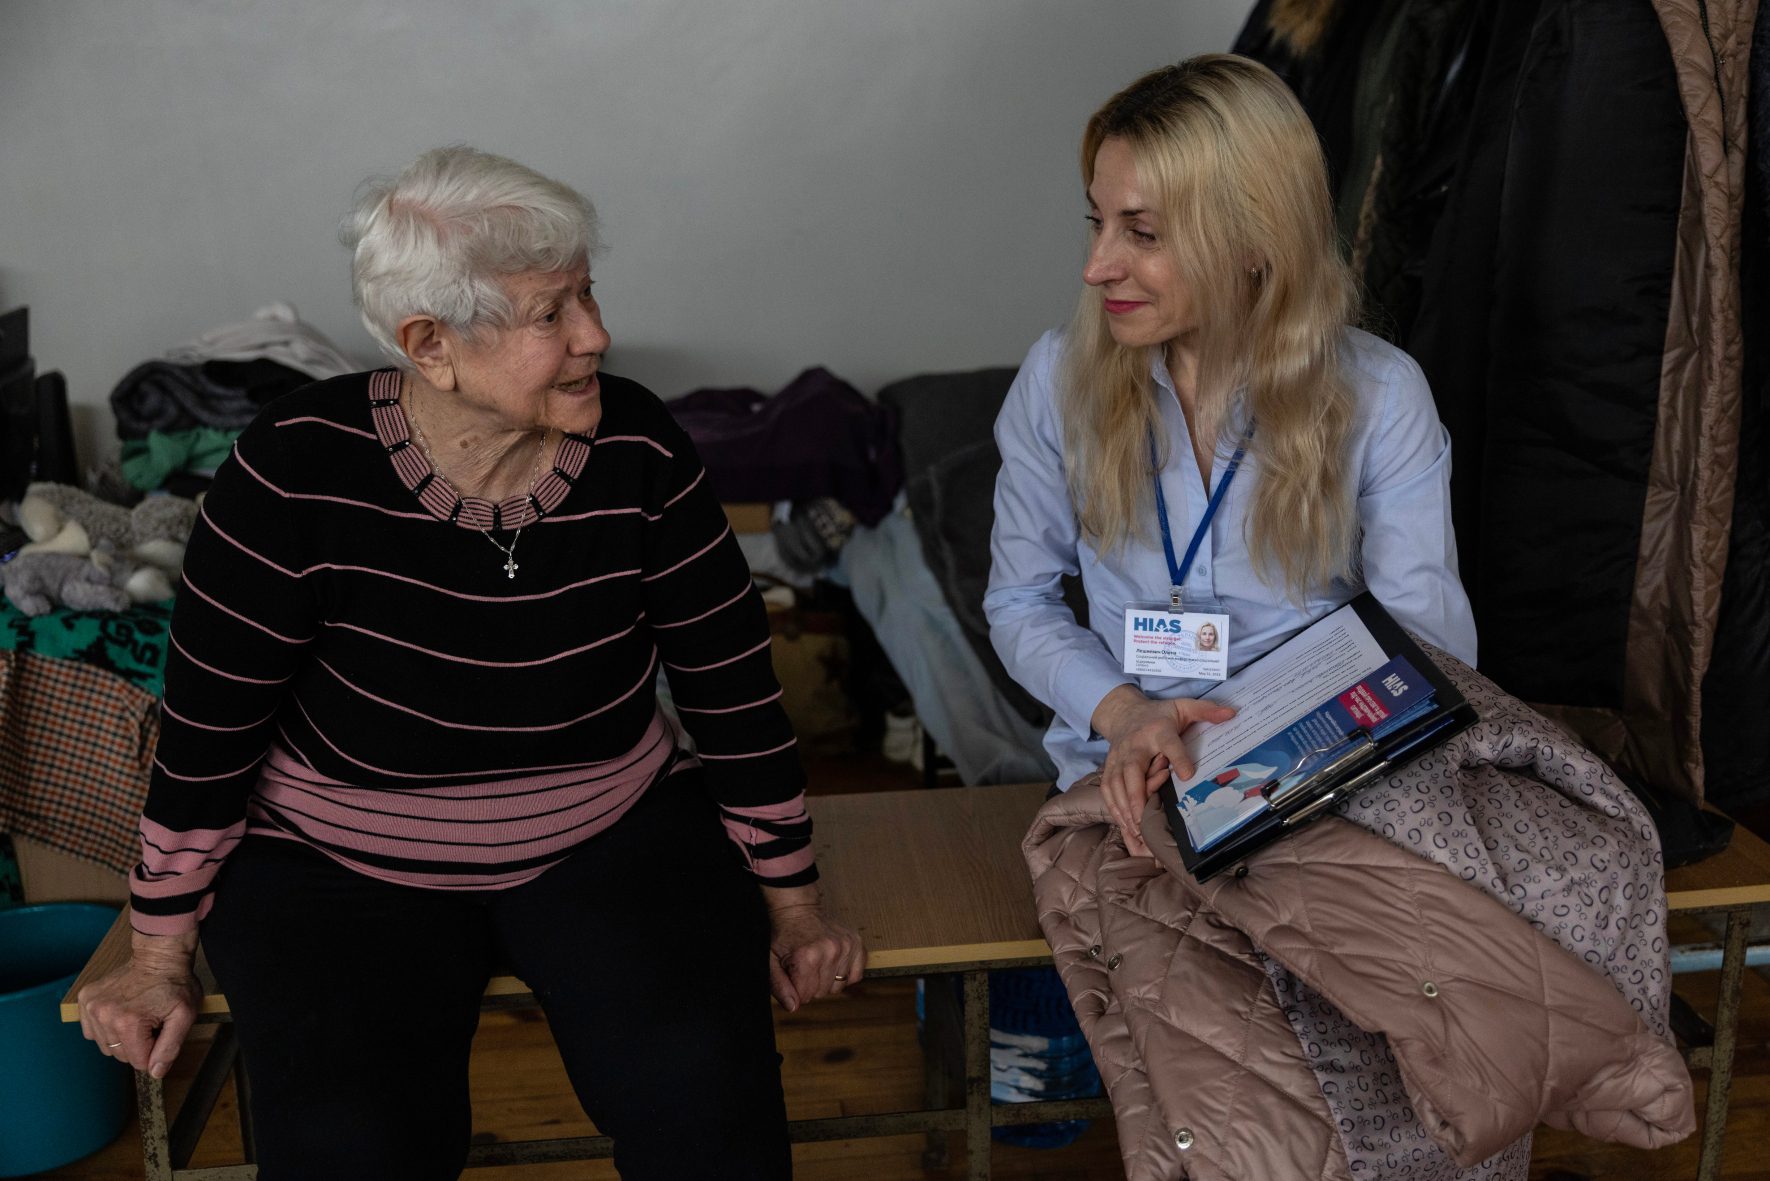 A HIAS worker chats with a resident at a shelter in Lviv, Ukraine.